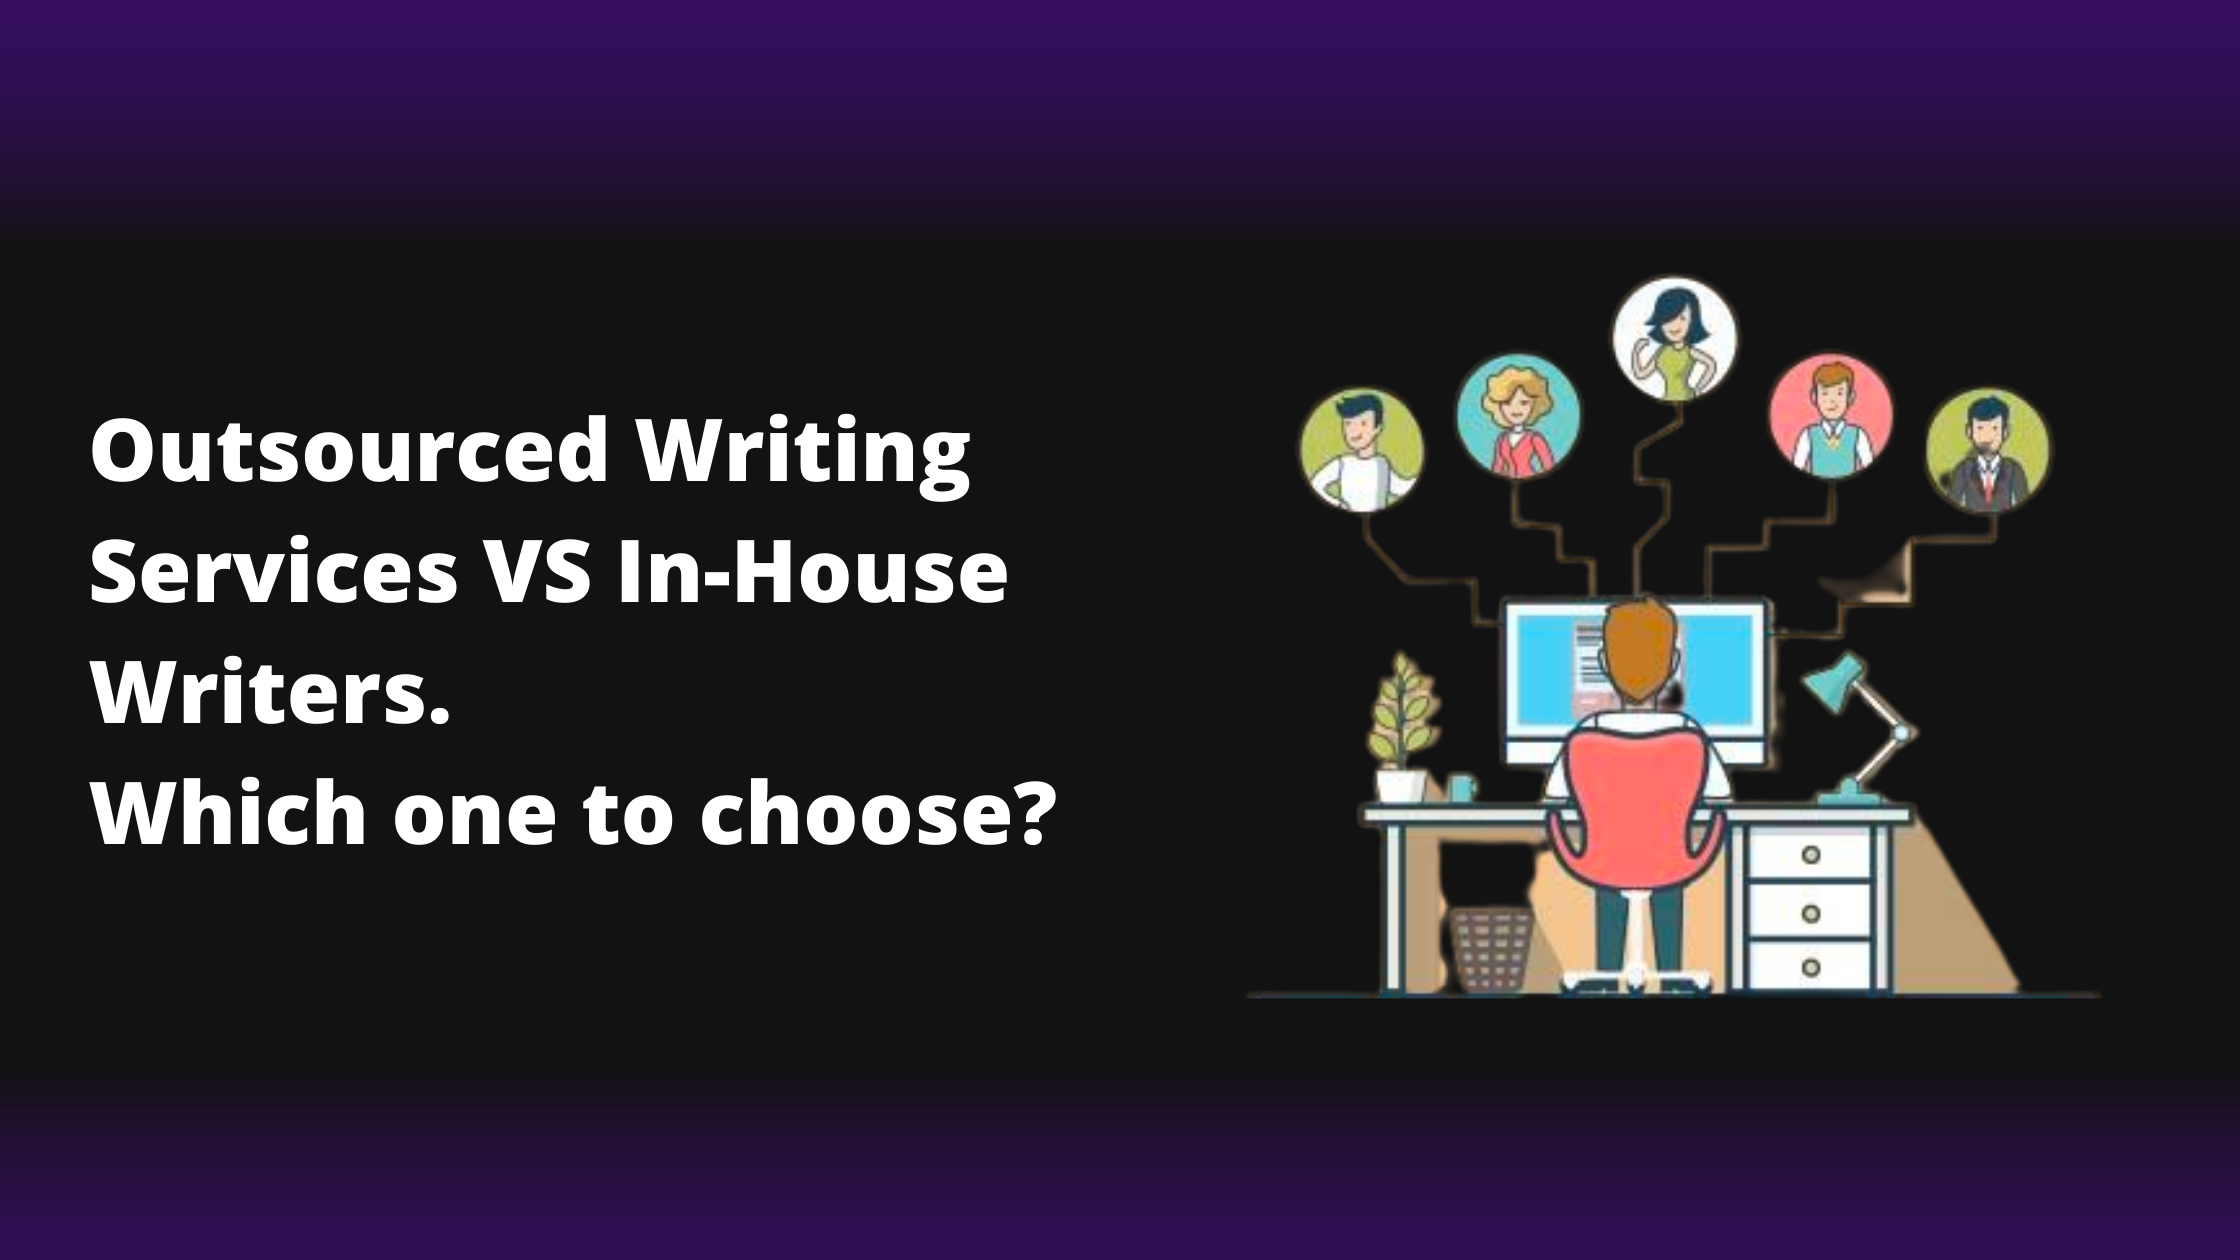 Outsourced Writing Services VS In-House Writers: Which one to choose?